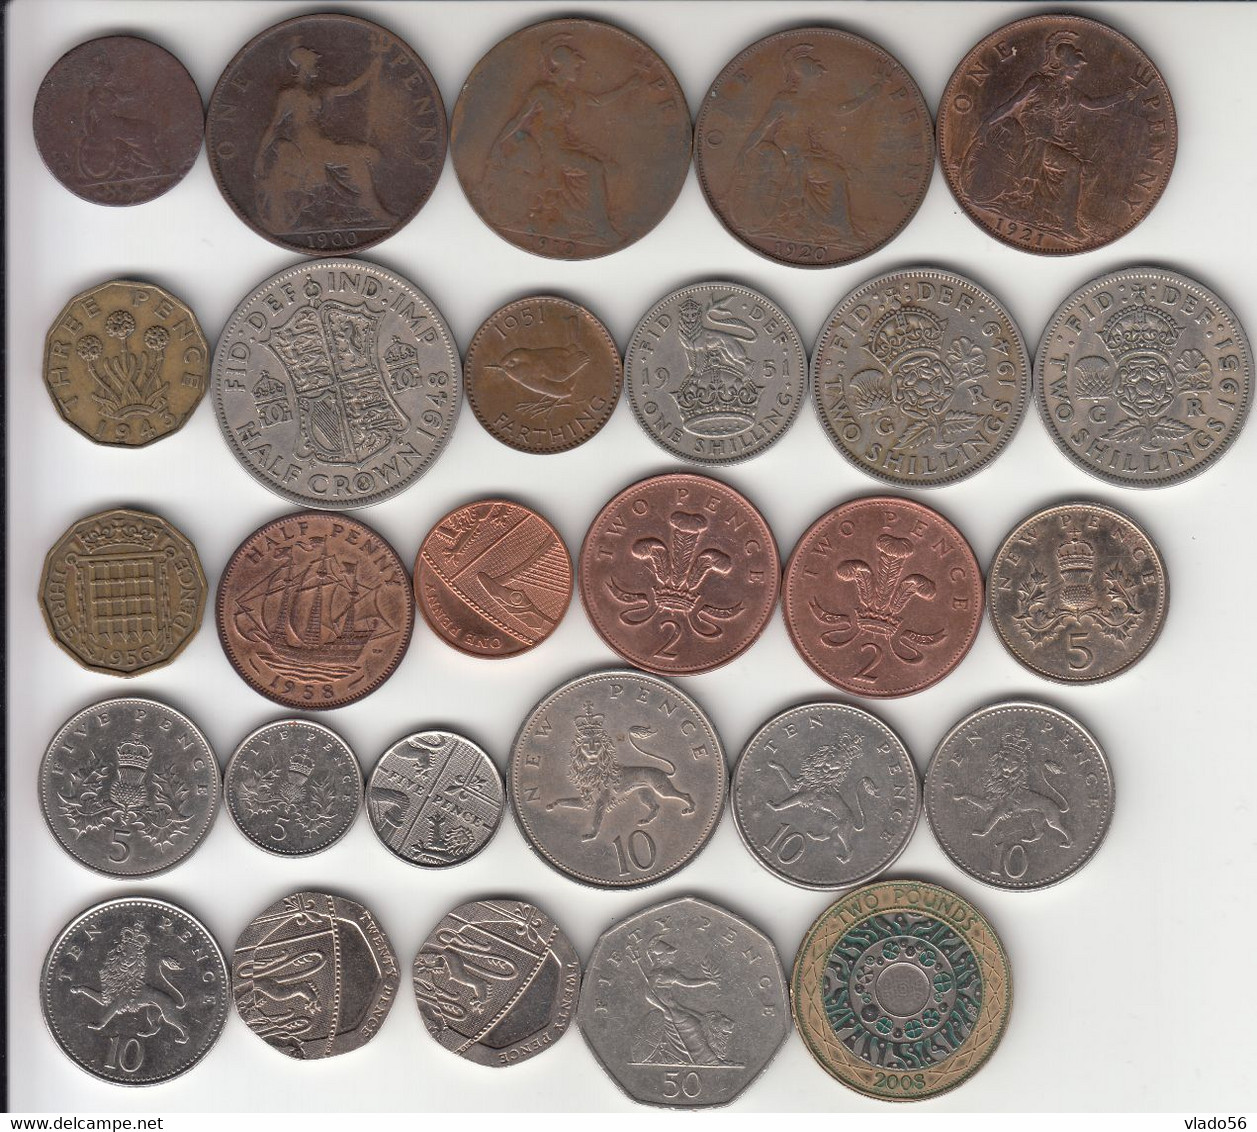 GREAT BRITAIN  - LOT 27 DIFFERENT COINS FROM  1 FARTHING 1847 UP TO  2 POUNDS 2008 ,  LM1.23 - Sammlungen